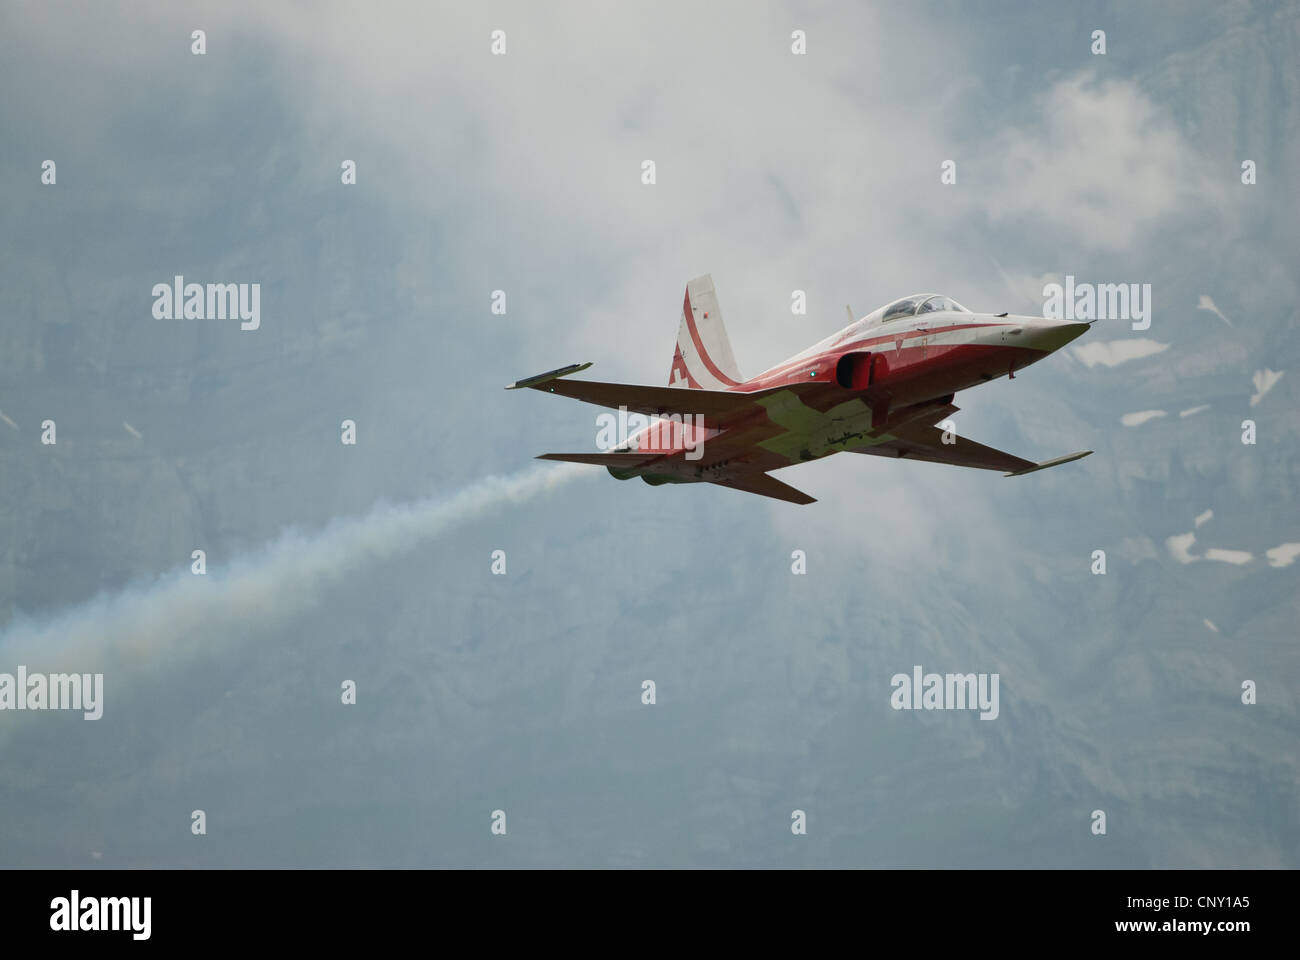 Patrouille Suisse with Tiger jets during an airshow in Mollis 2009, Switzerland Stock Photo